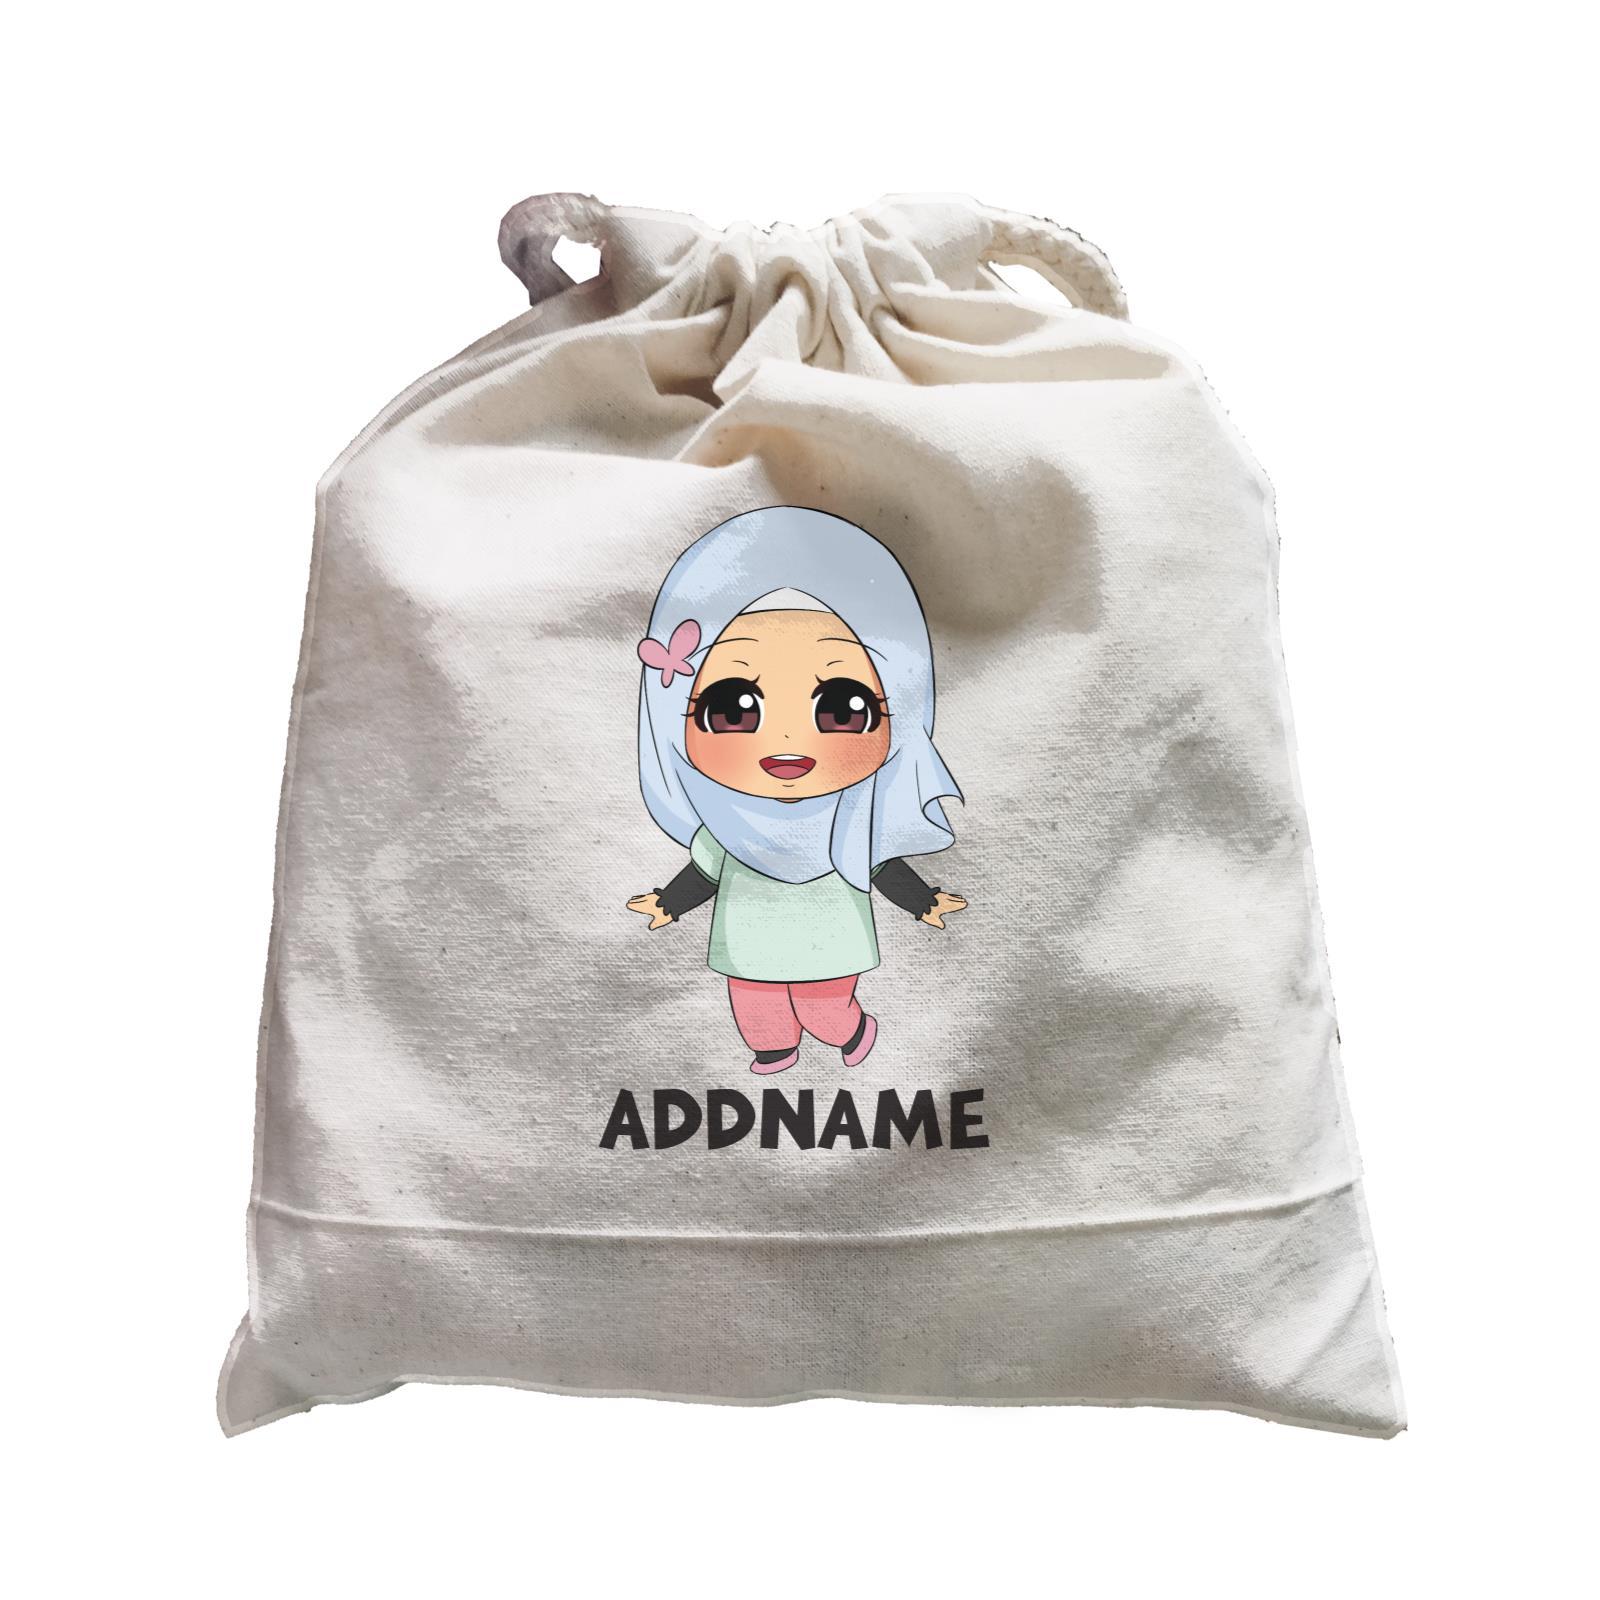 Children's Day Gift Series Little Malay Girl Addname  Satchel